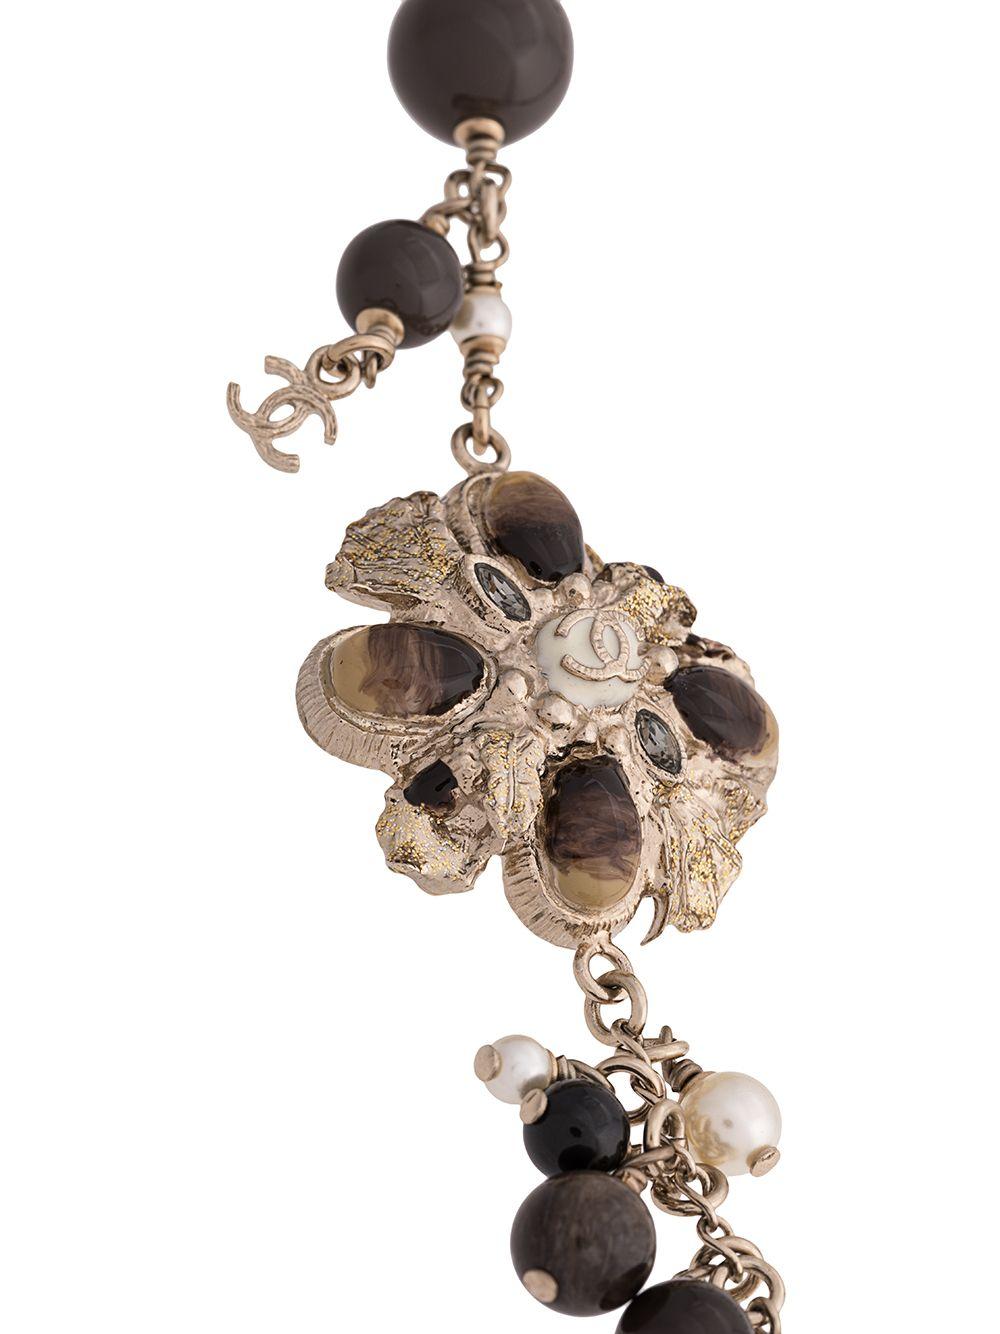 Crafted in France, this elegant, pre-owned necklace from Chanel is a unique piece that adds a touch of classic sophistication to any outfit and features an intricate combination of silver-toned metal hardware, natural coloured stones, glass beads